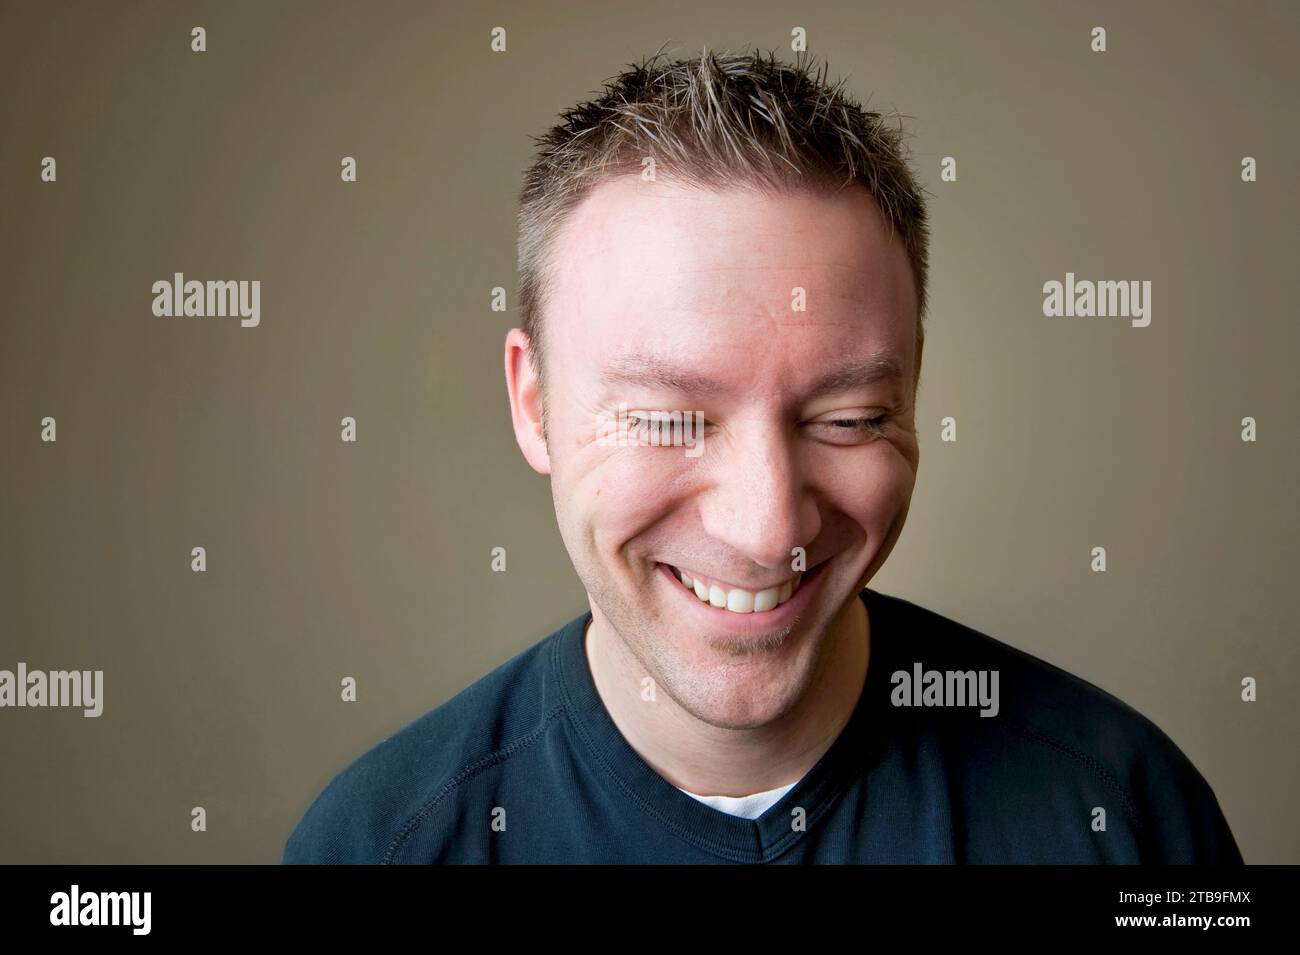 Portrait of a young man laughing; Studio Stock Photo